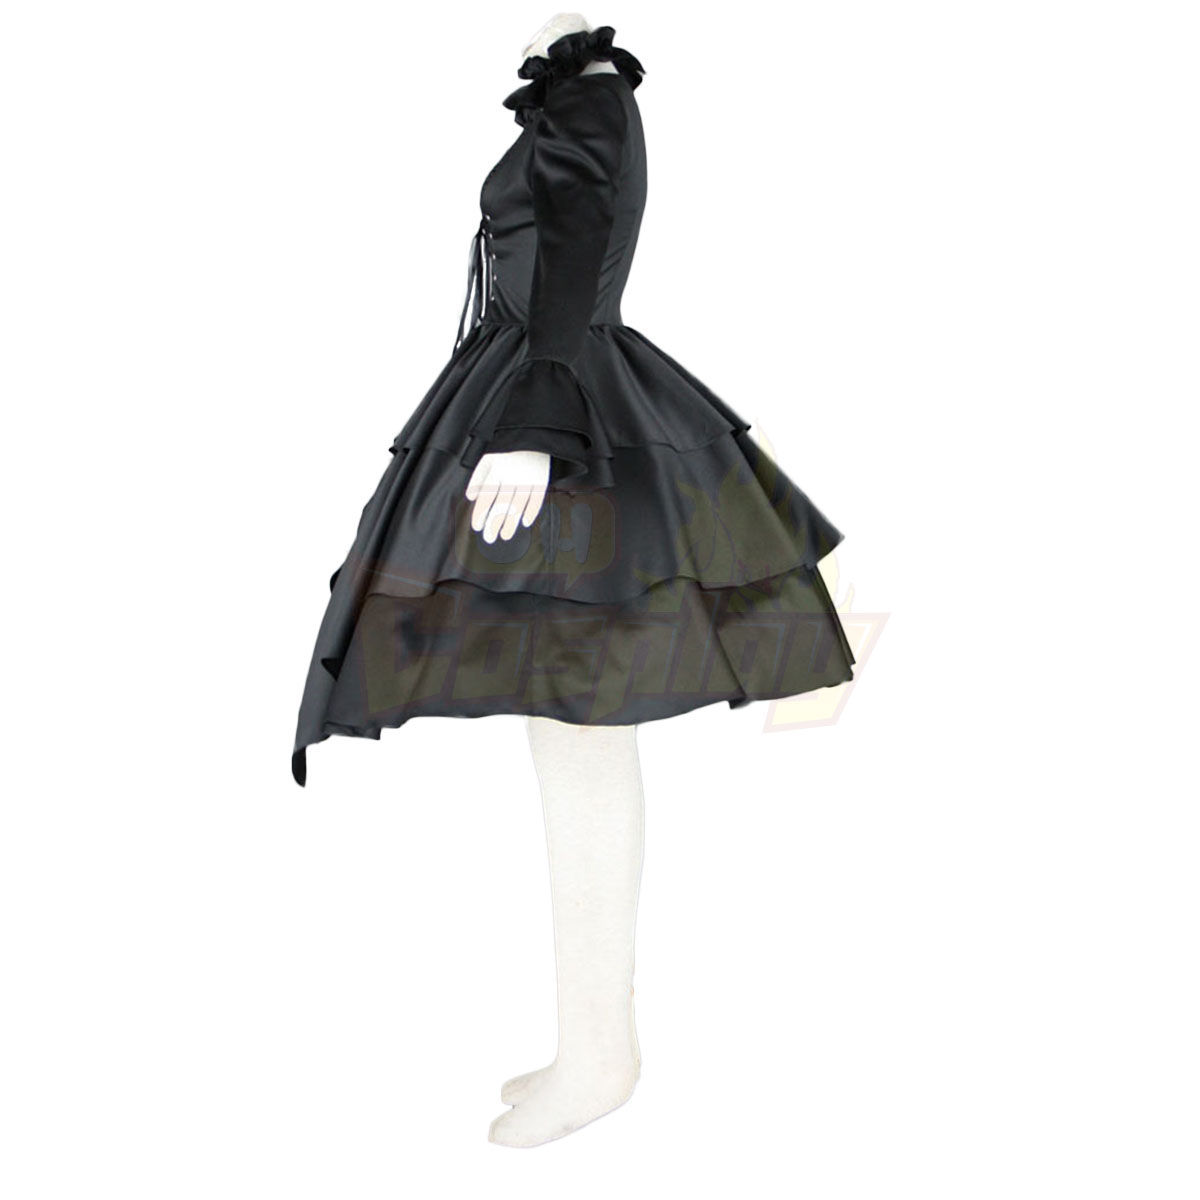 Deluxe Lolita Culture Neckerchief Bustle Middle Dresses Cosplay Costumes